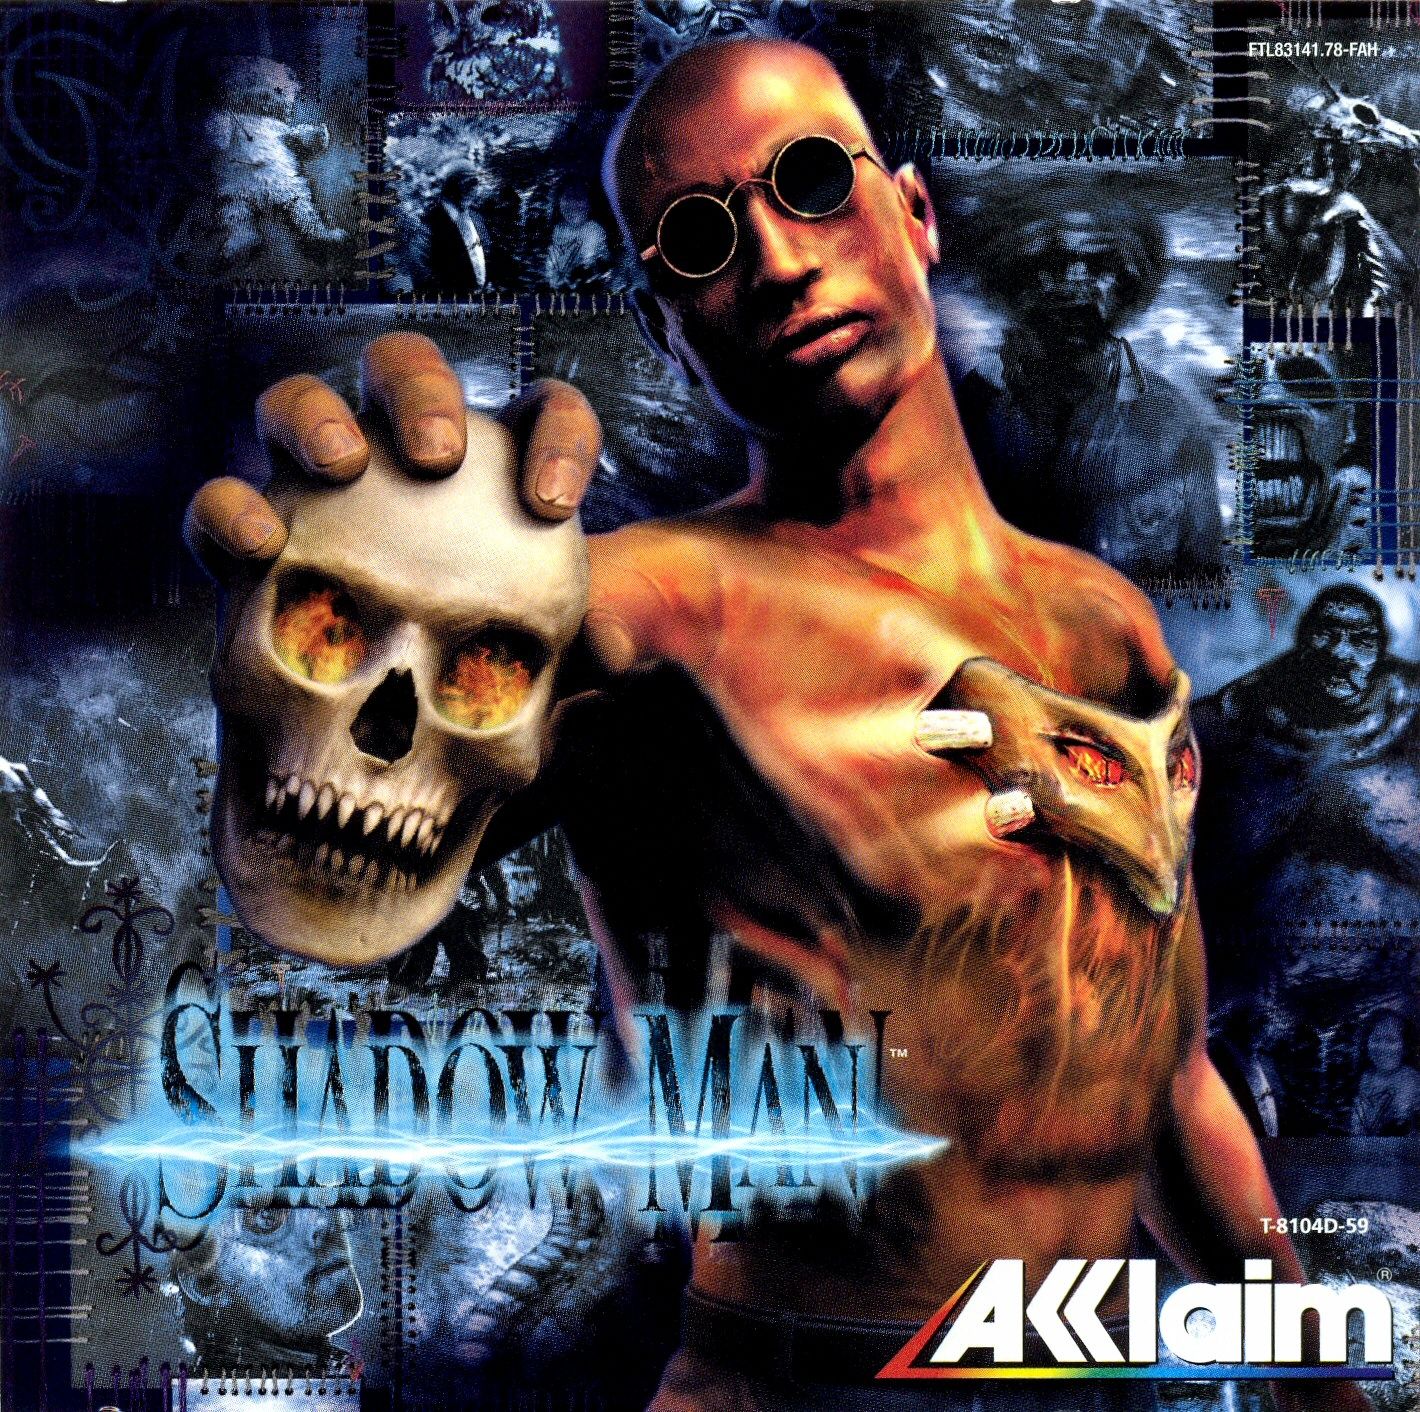 The man from the shadow. Shadow man ps1. Shadow man Remastered. Shadowman ps1. Shadow man Acclaim.